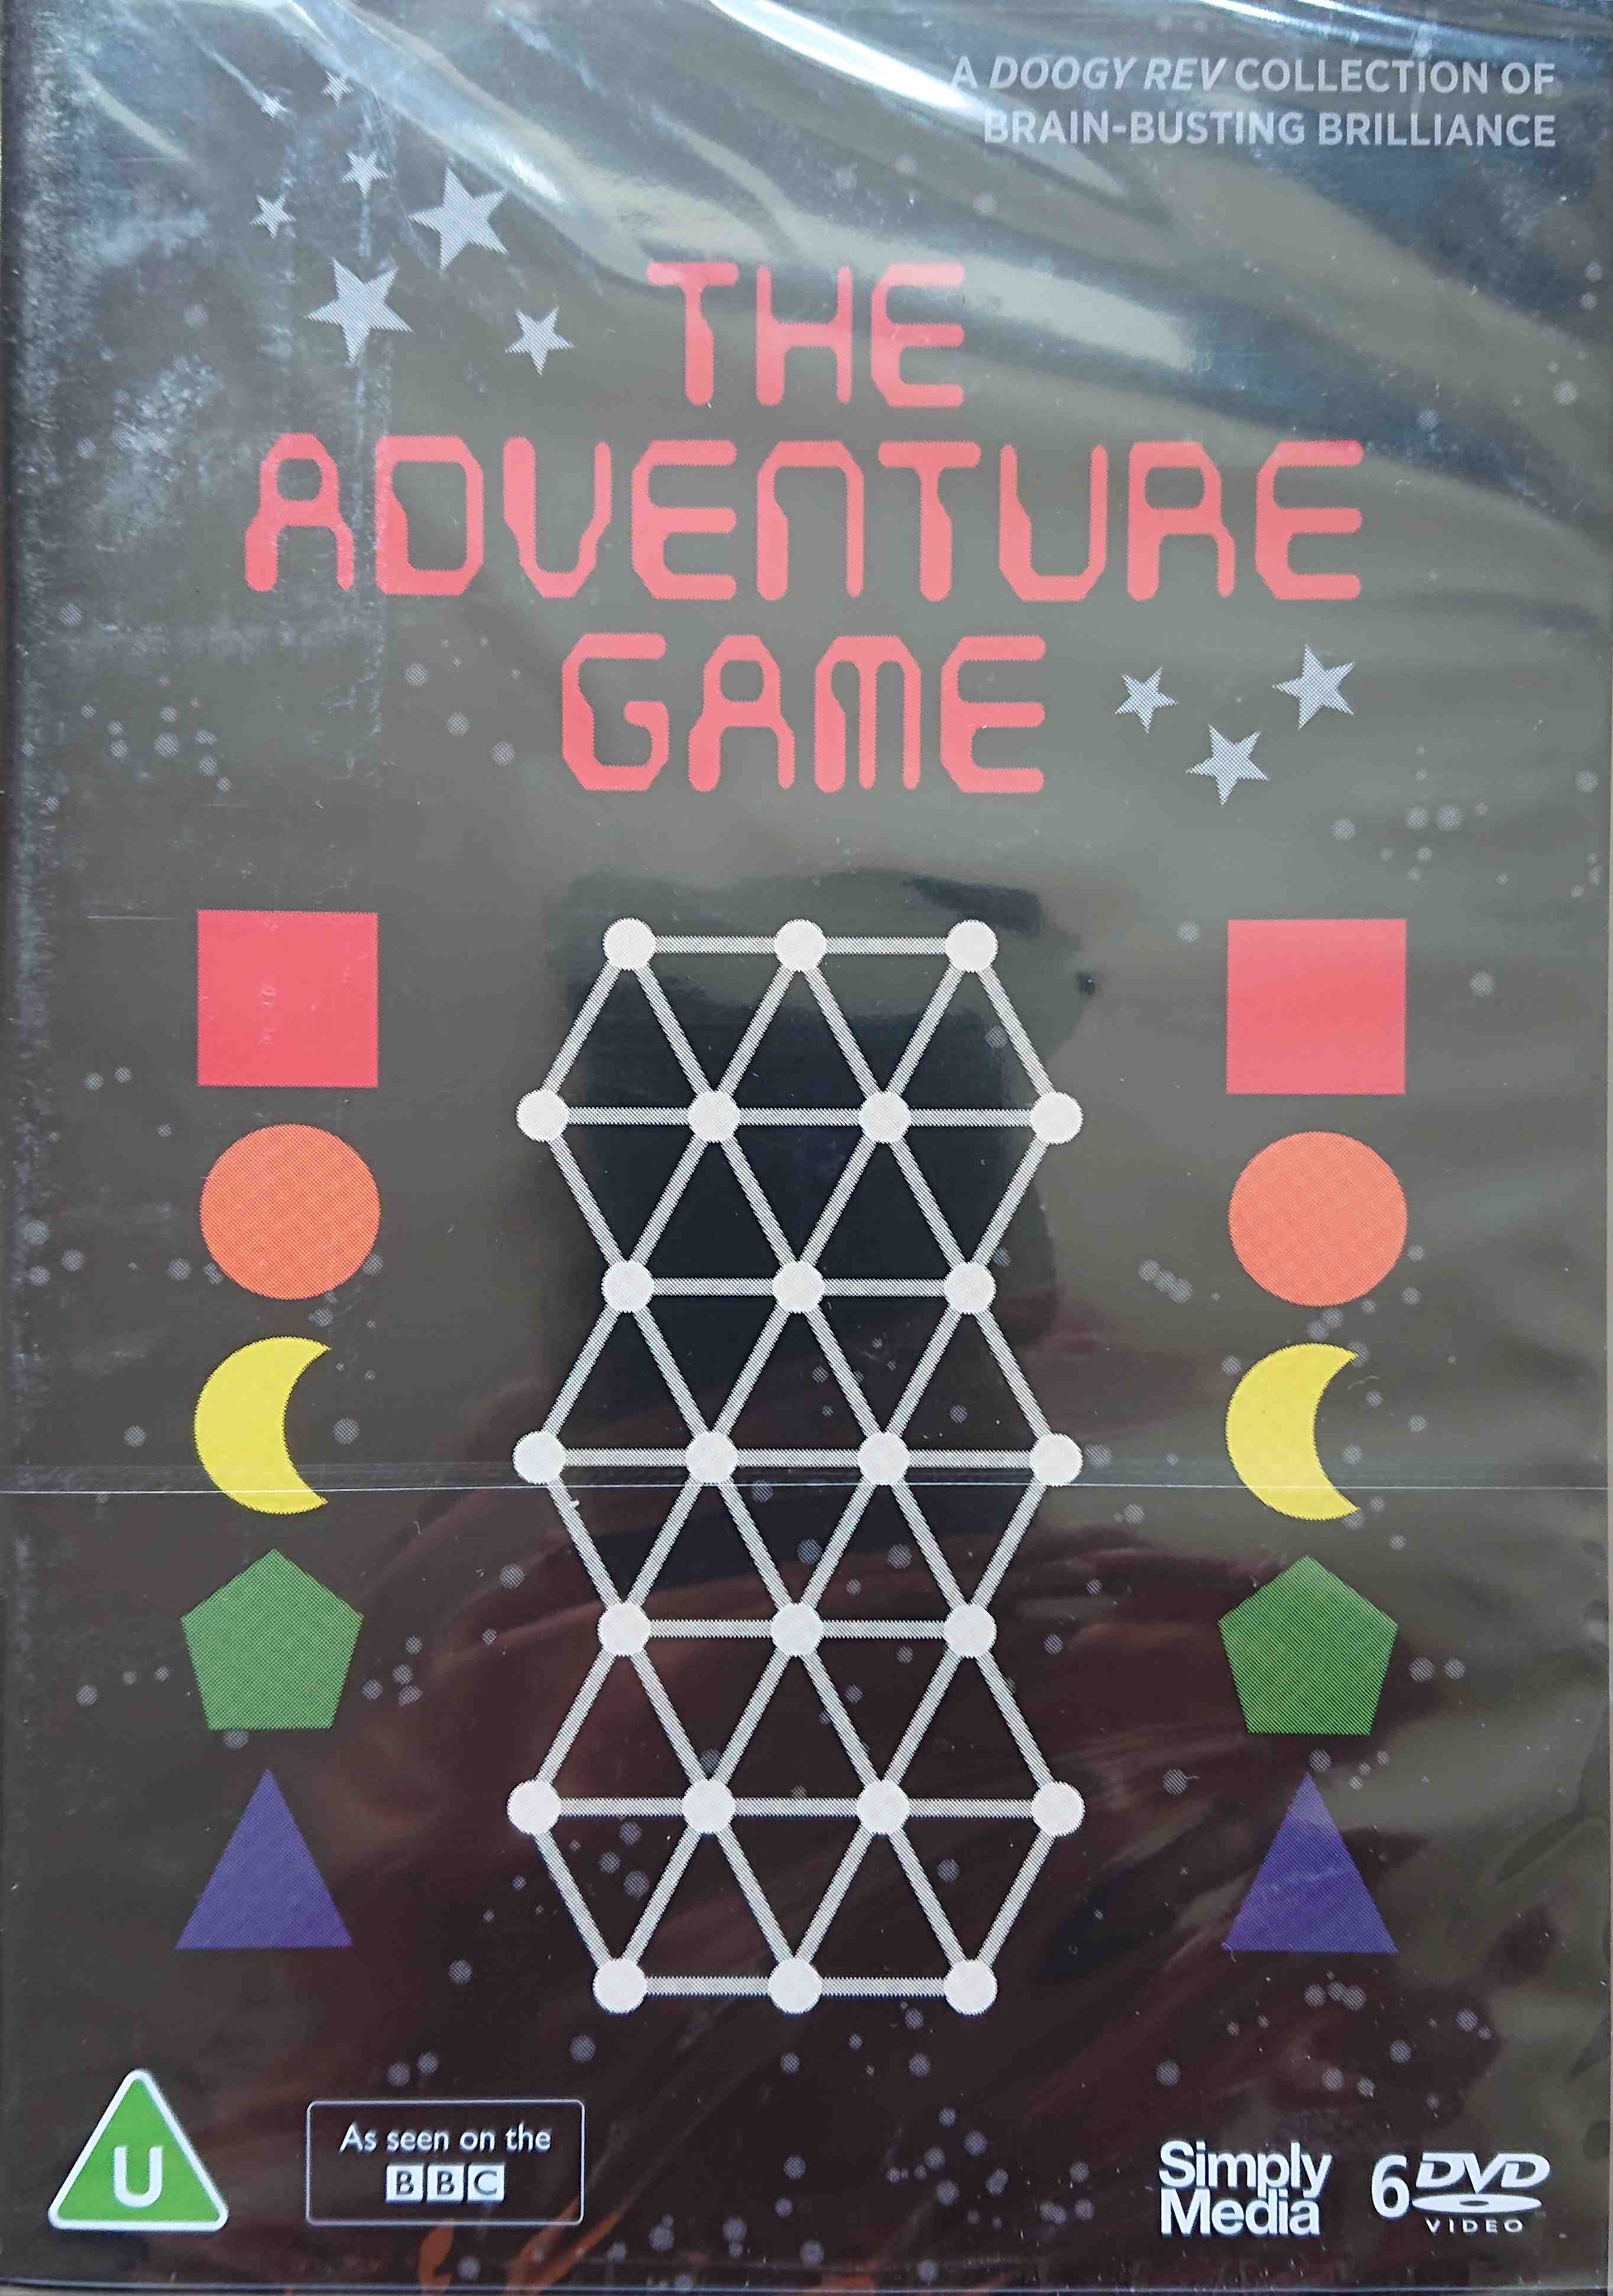 Picture of The adventure game by artist Patrick Dowling from the BBC dvds - Records and Tapes library